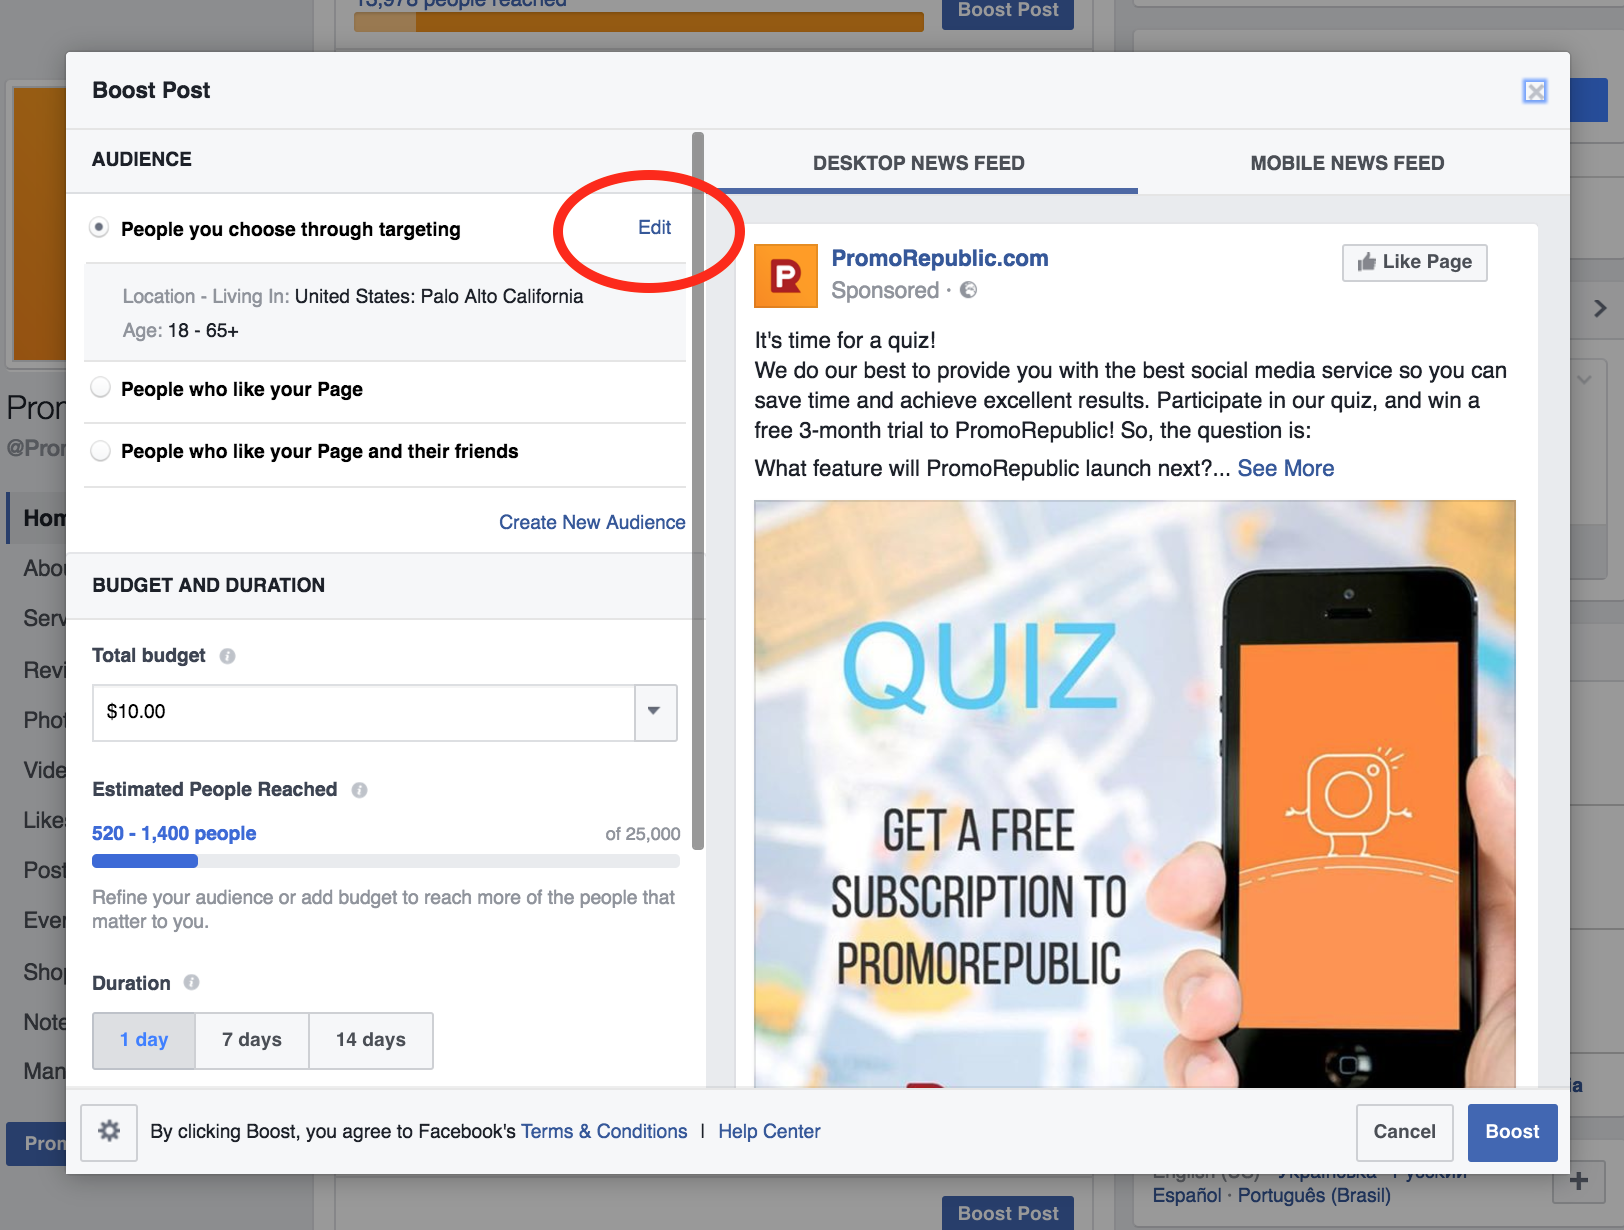 how to choose audience for post boost on Facebook